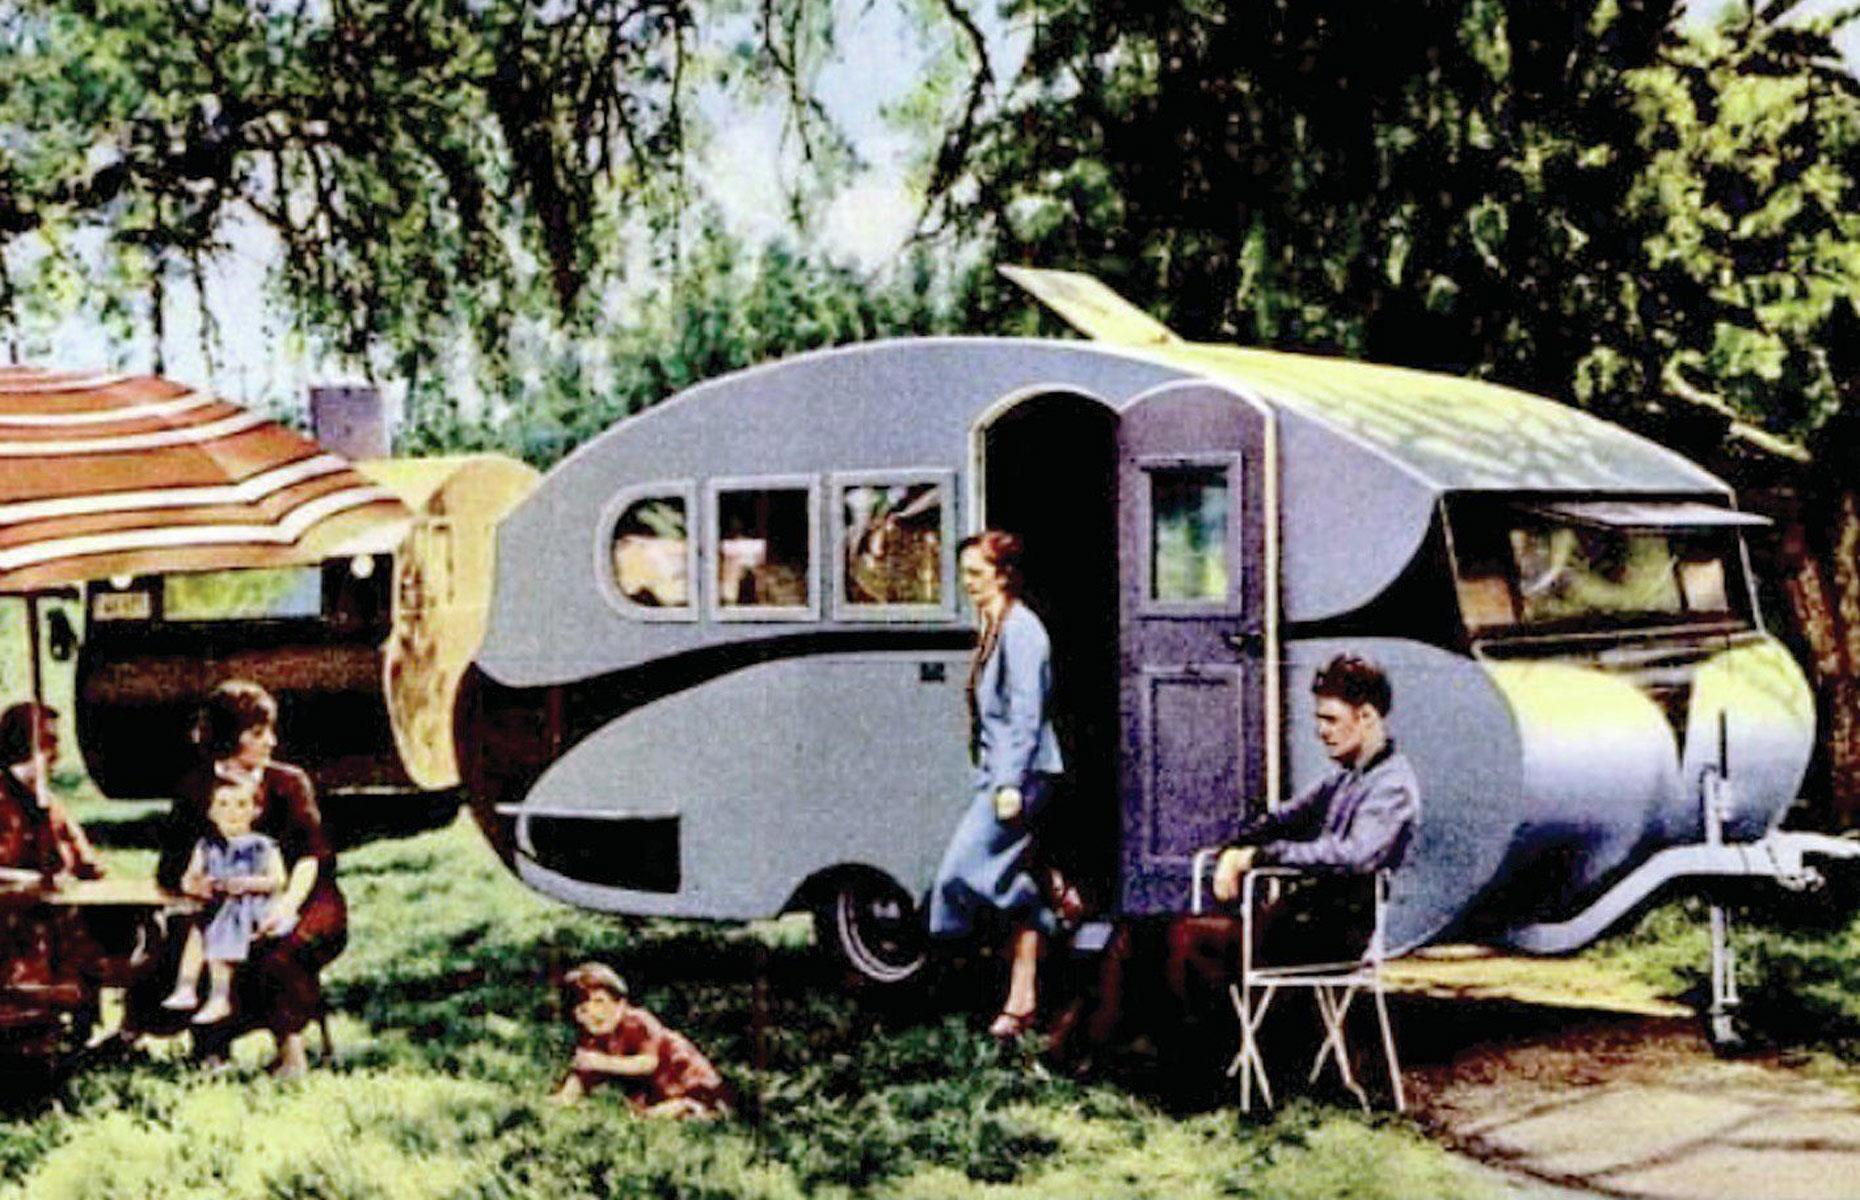 <p>The fledgling firm completed its first factory-produced model, the Torpedo, in 1932, and launched two larger models soon after, the Silver Cloud (pictured) and the Airlite. A couple of years later, Wally Byam adopted the name Airstream, a perfect moniker for the company's teardrop-shaped trailers that cruised down the road "like a stream of air".</p>  <p><strong><a href="https://www.loveexploring.com/galleries/97886/best-luxury-glamping-near-me-in-usa-2021?page=1">Discover America's best glamping sites</a></strong></p>